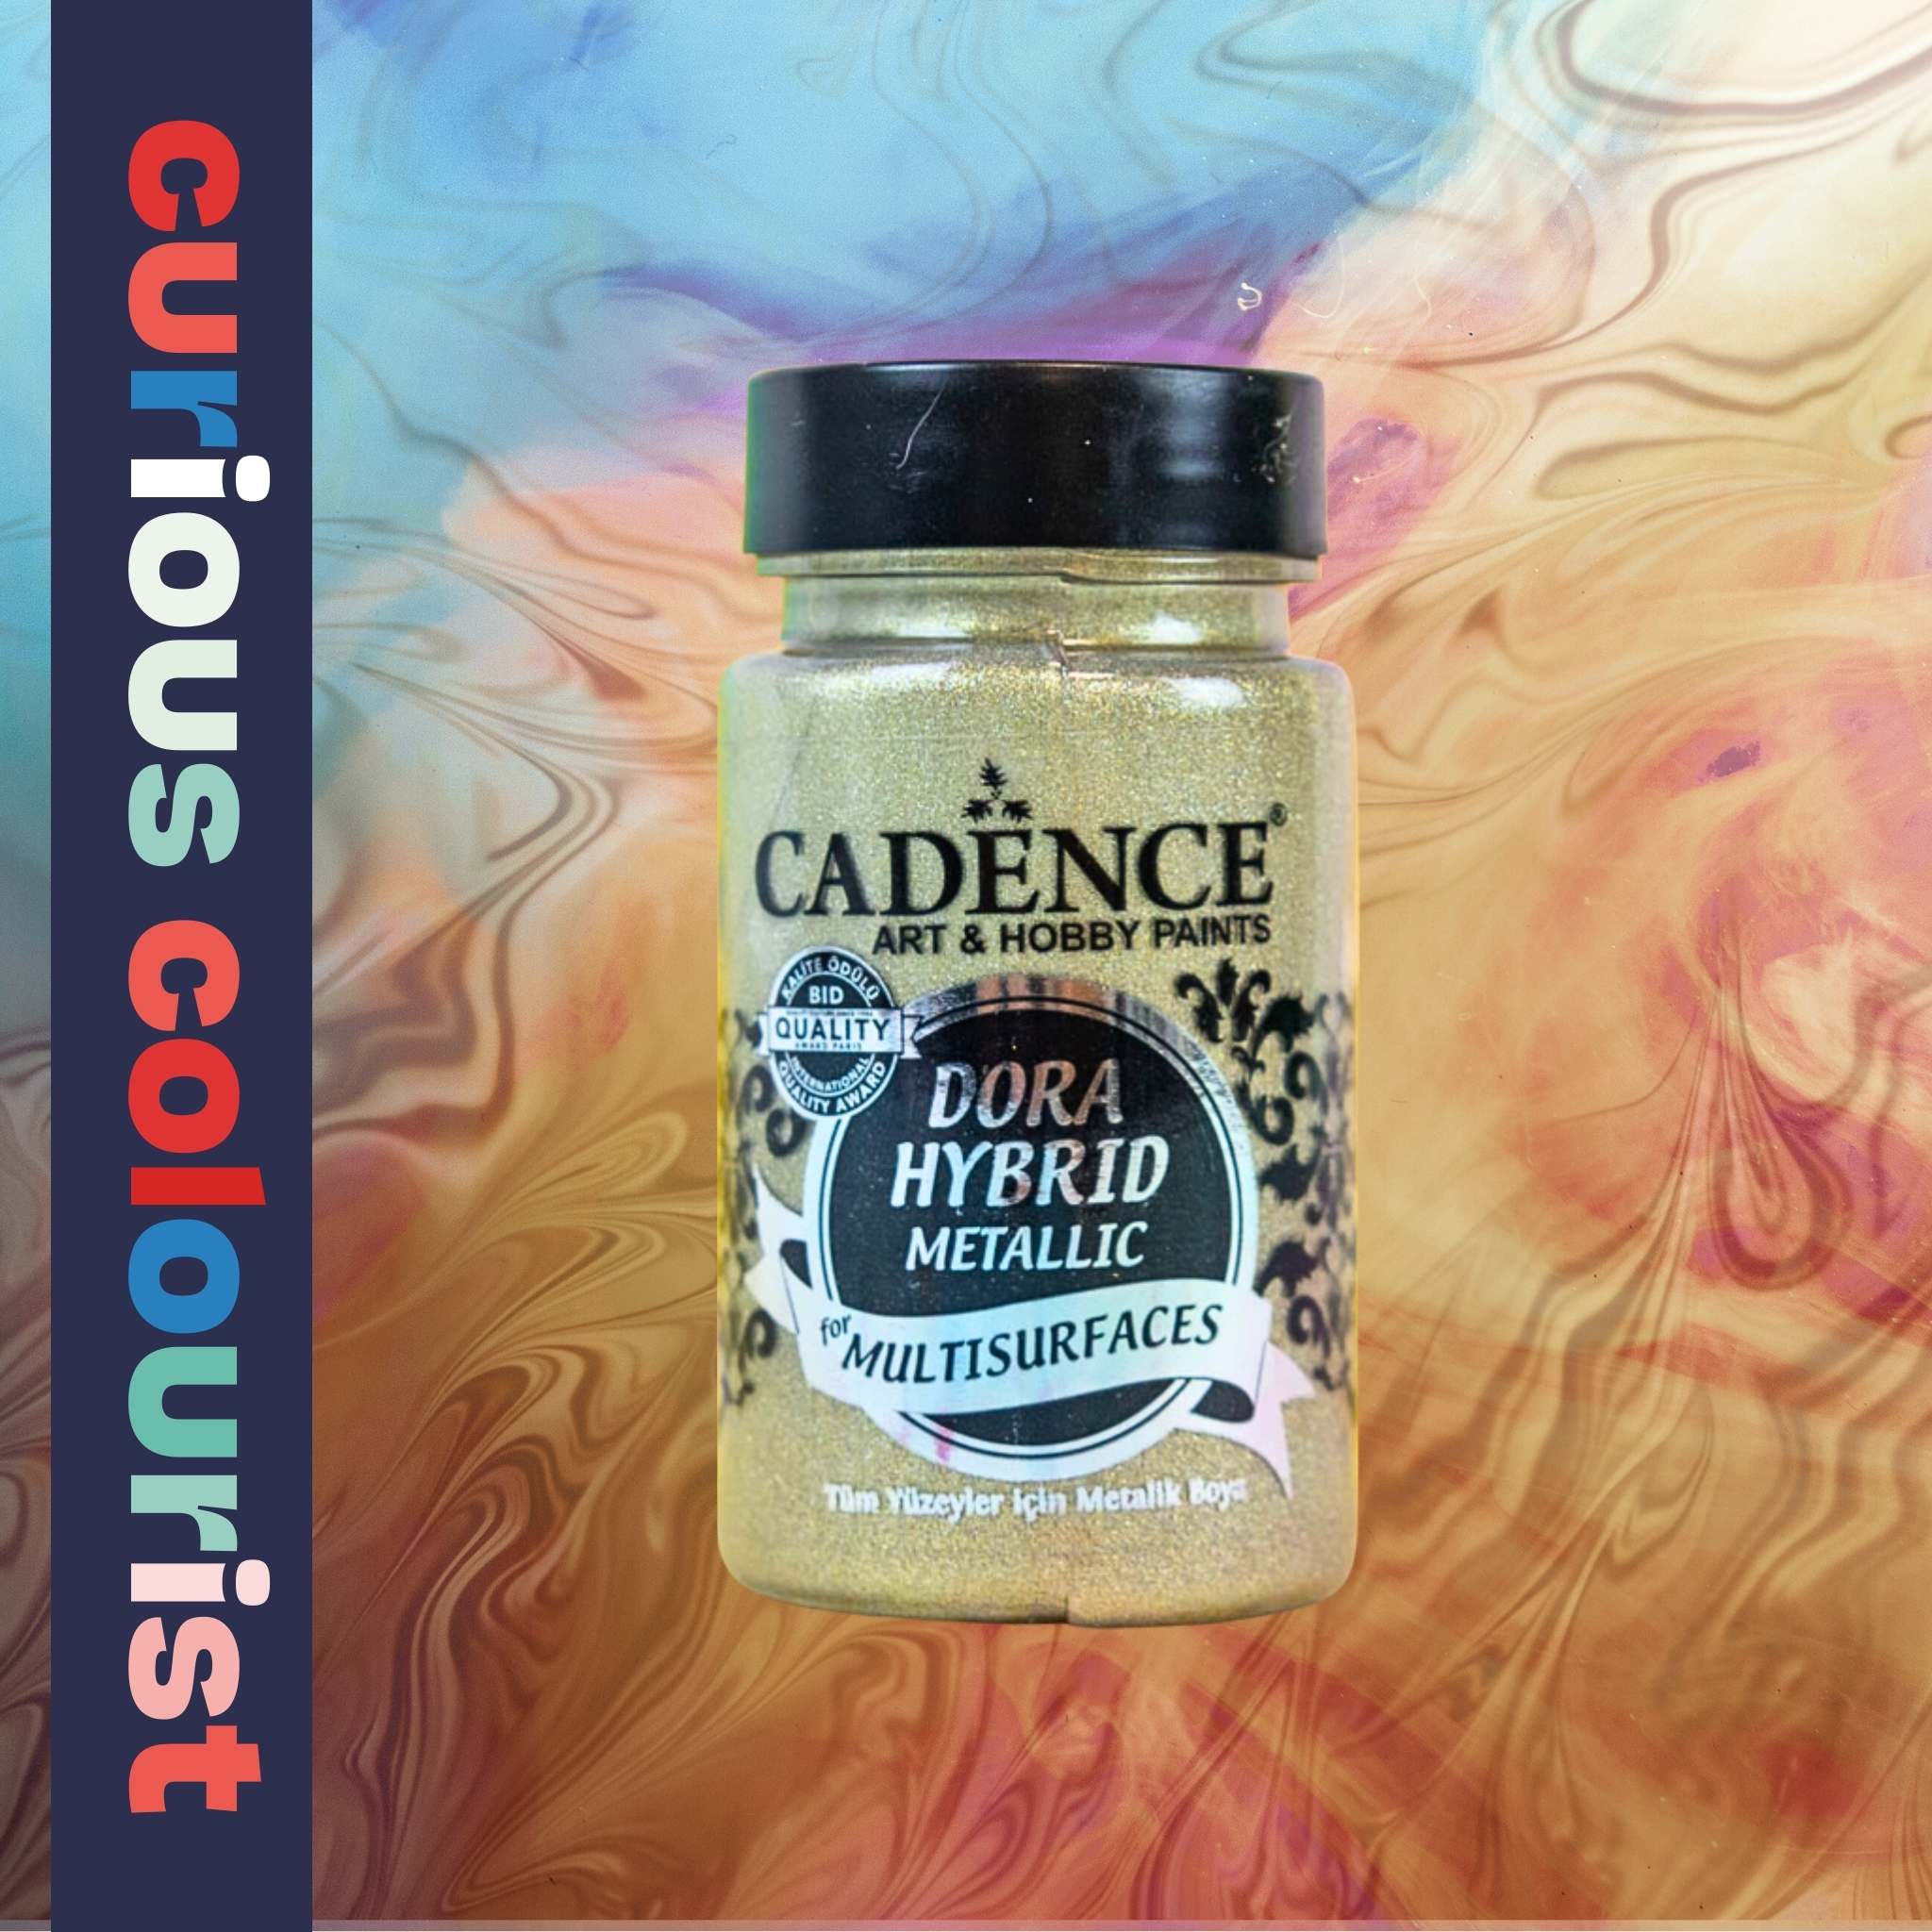 Platinum Two tone metallic paint from Cadence that will give your leather craft projects a glitter and shine - use to as paint effects, re-colour or personalise your leather shoes or bags.